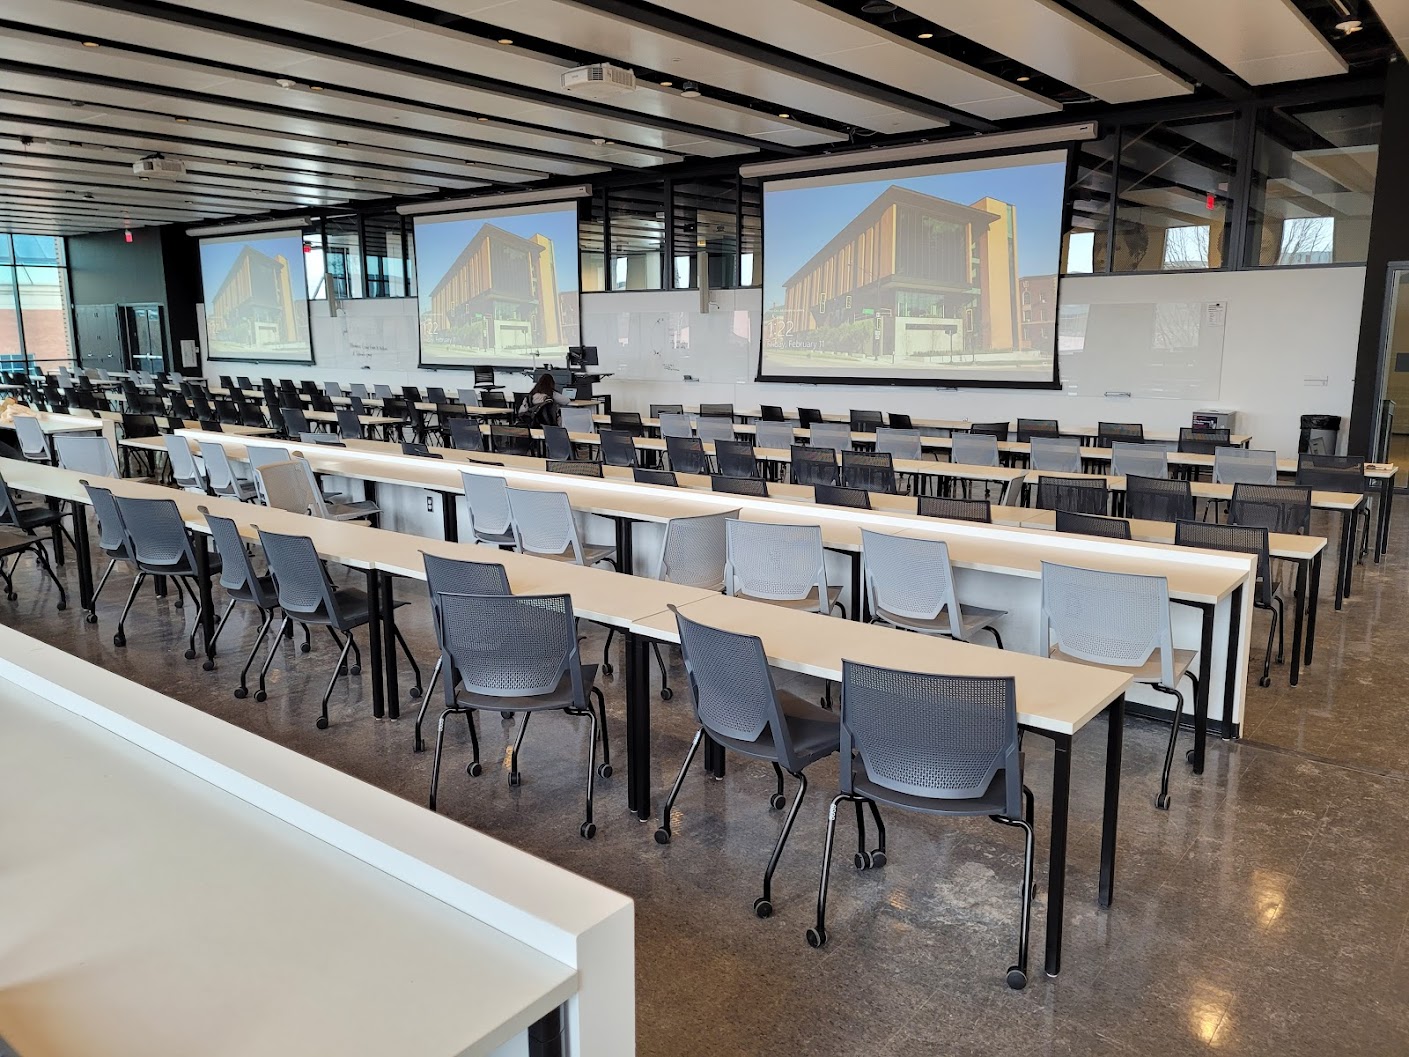 This is a view of the room, with student desks, projection screens, a front lecture table, and glass boards.